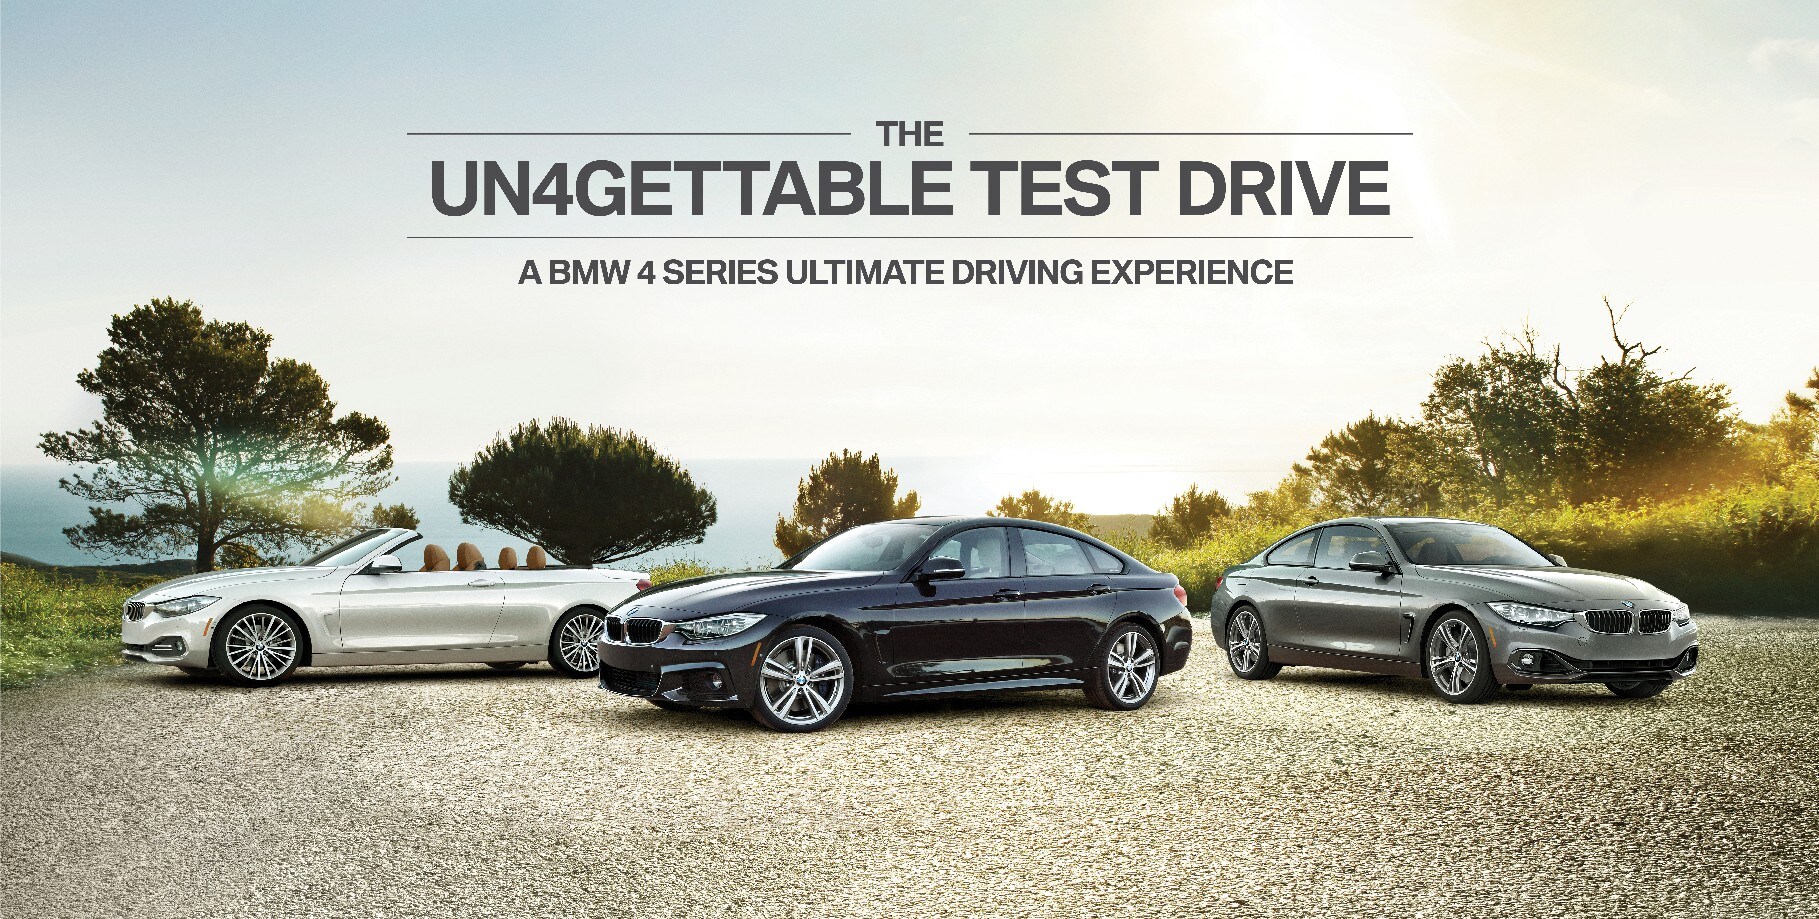 Bmw ultimate driving experience #4